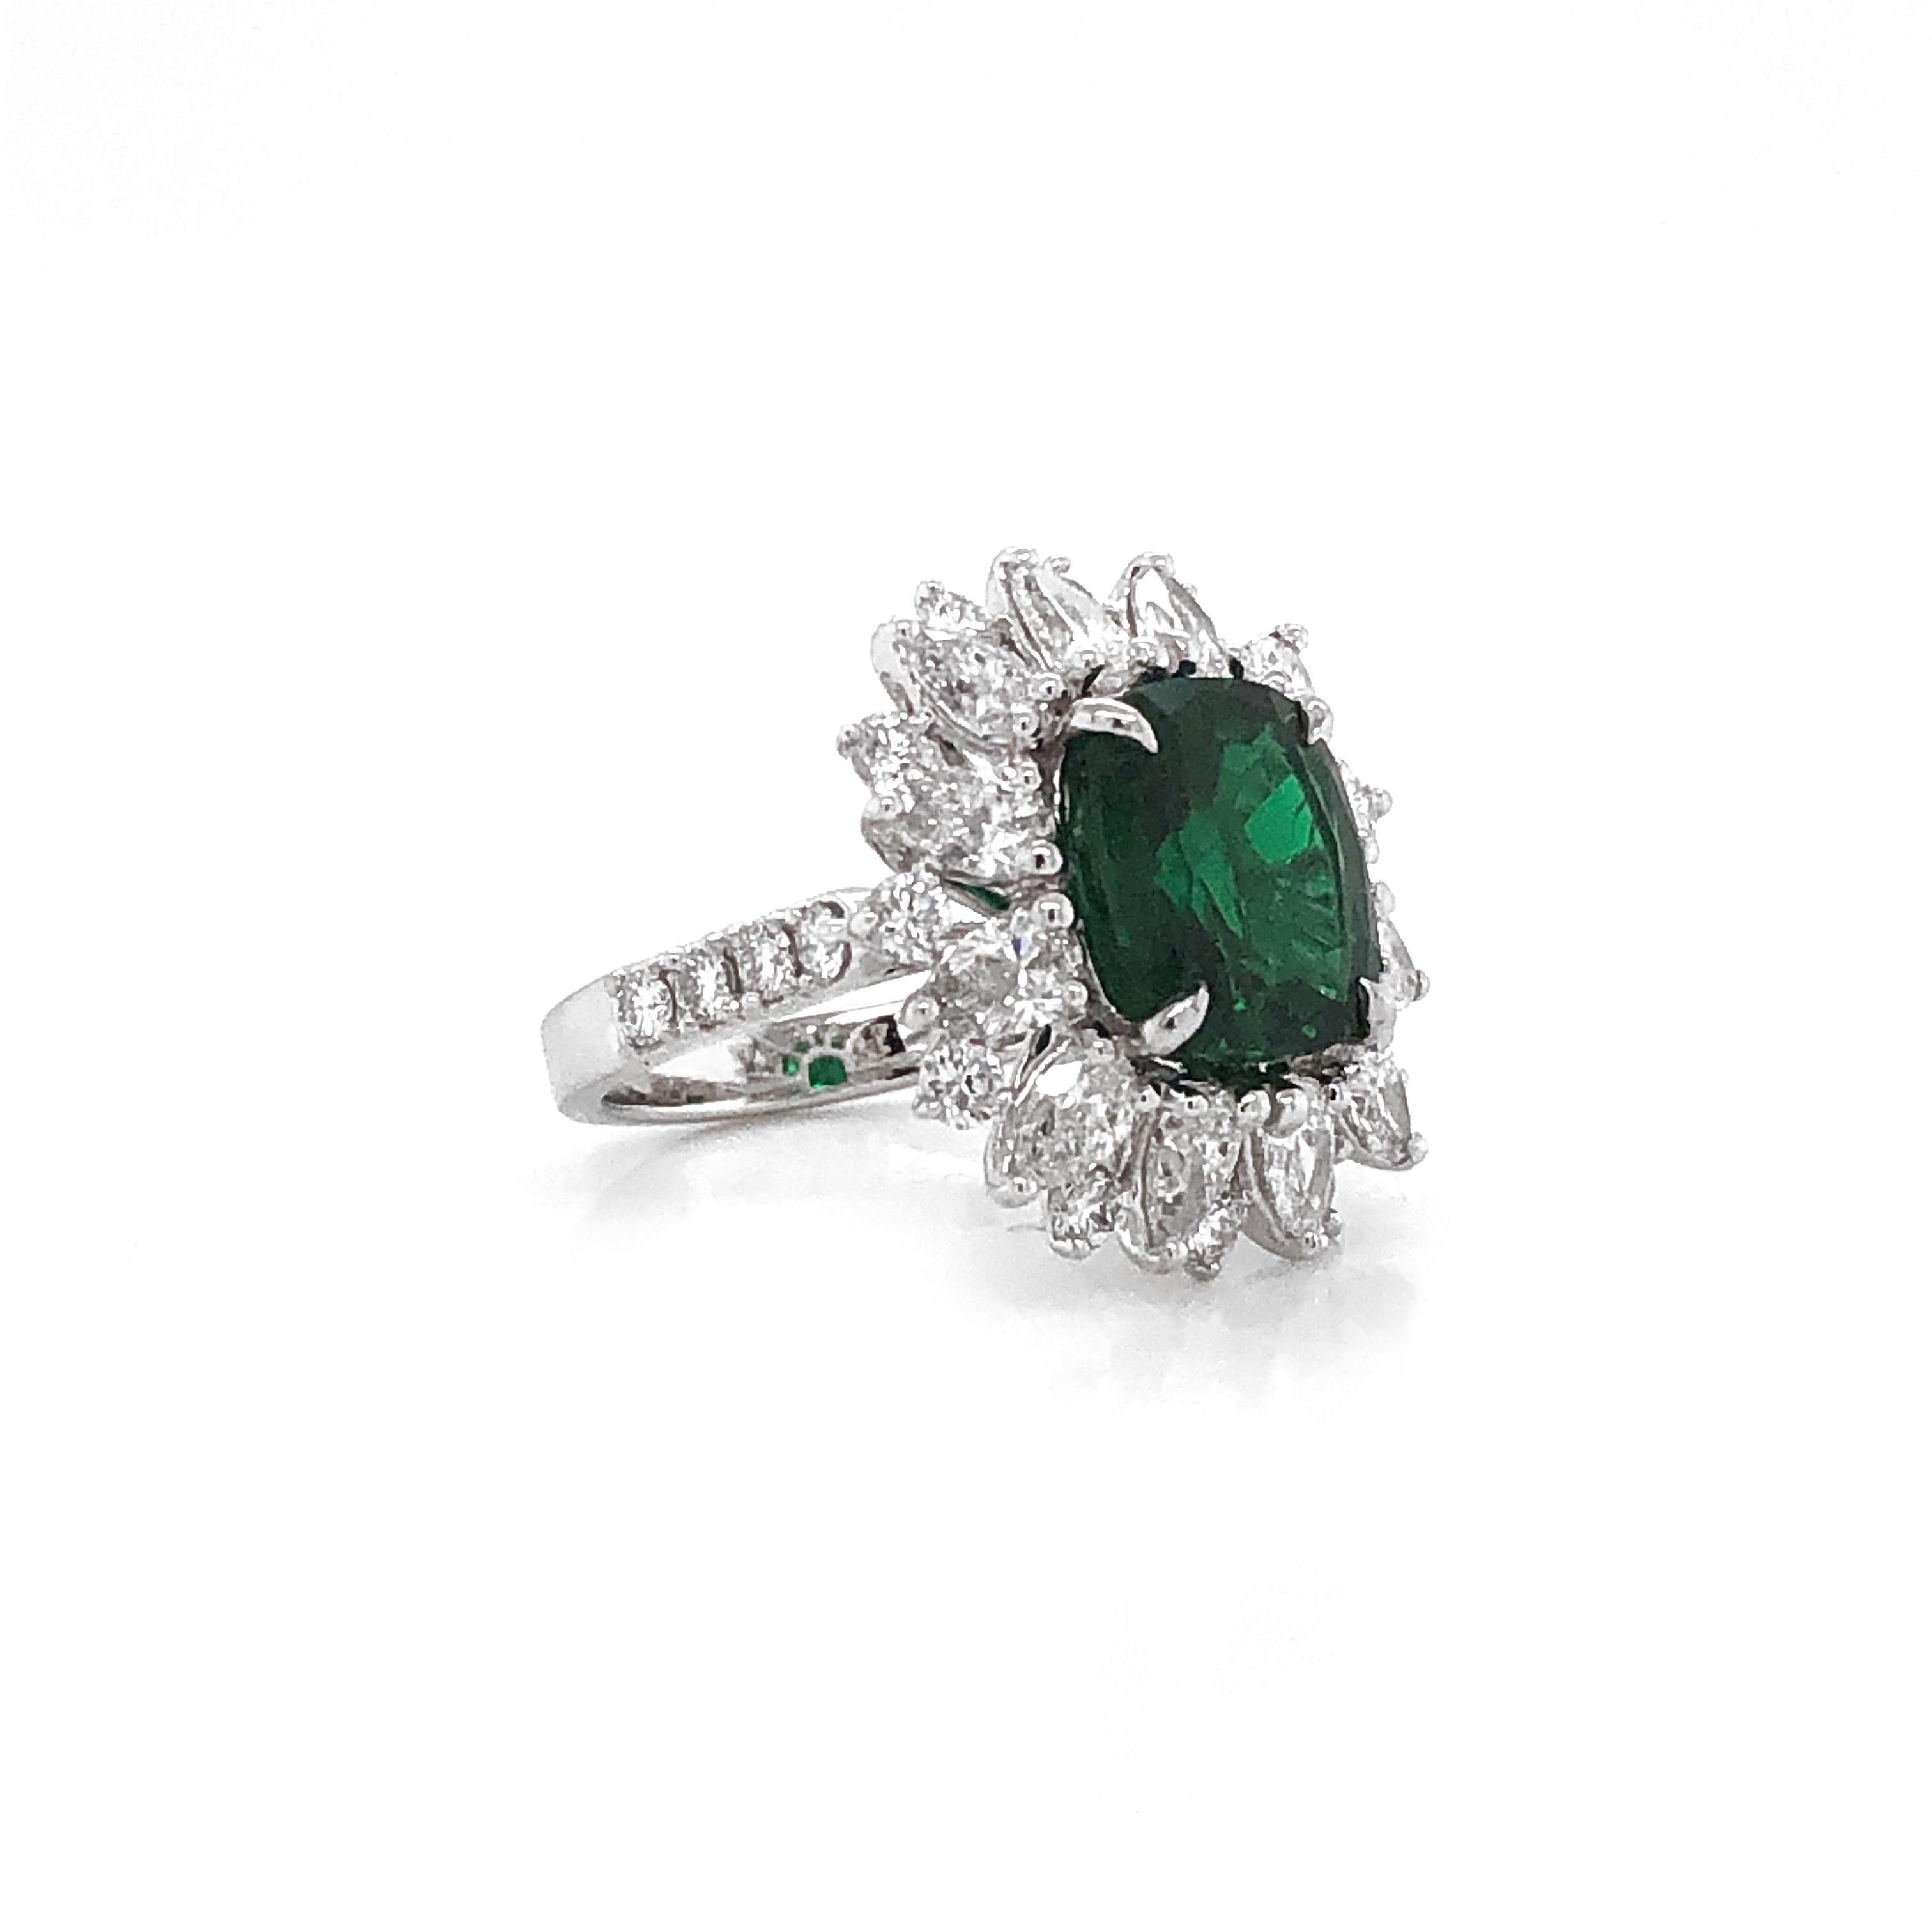 Contemporary Certified Zambian Cushion Cut Emerald 3.13 Carat Diamond Platinum Cocktail Ring For Sale